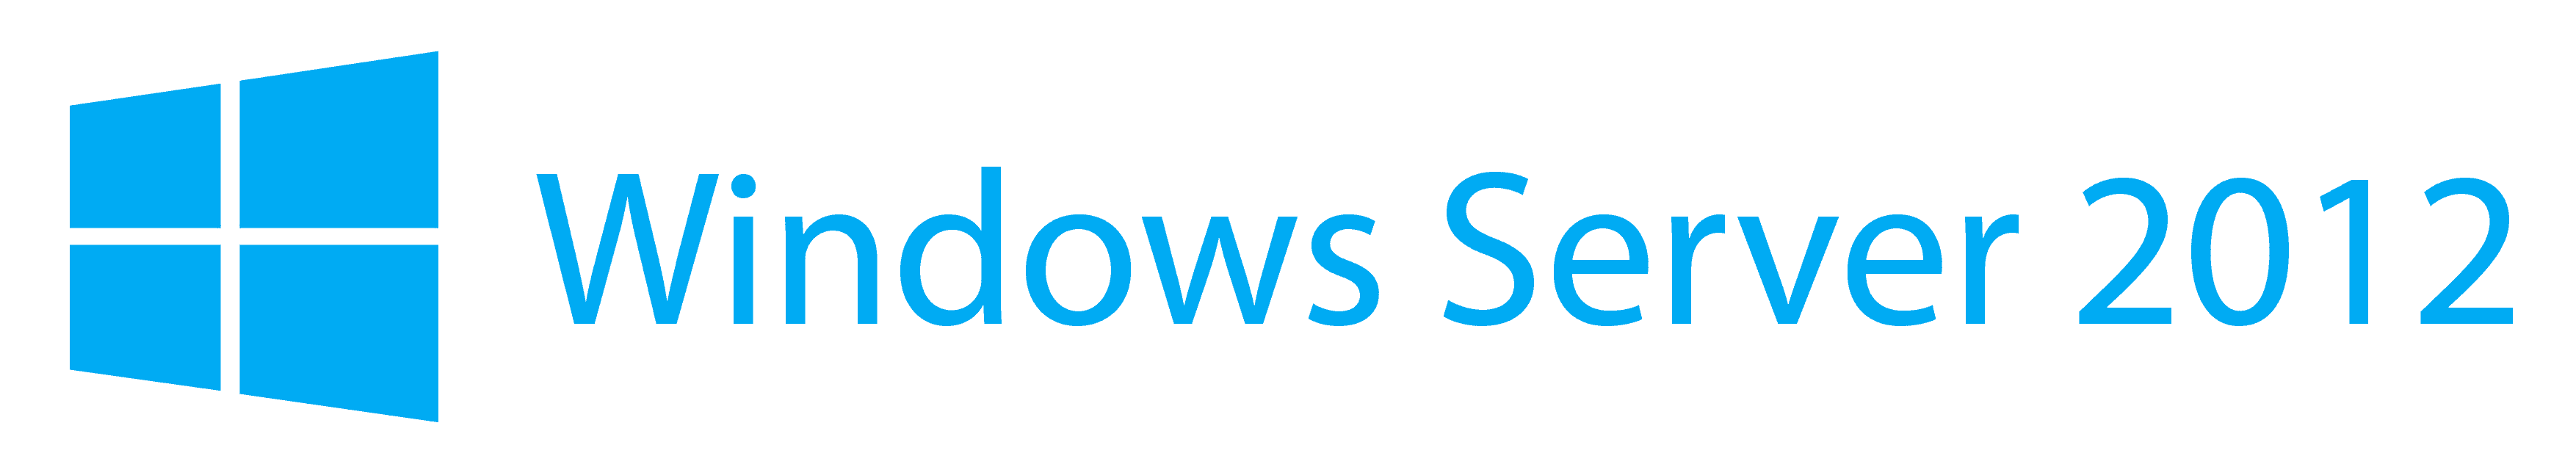 Windows Server 2012 R2 extended support